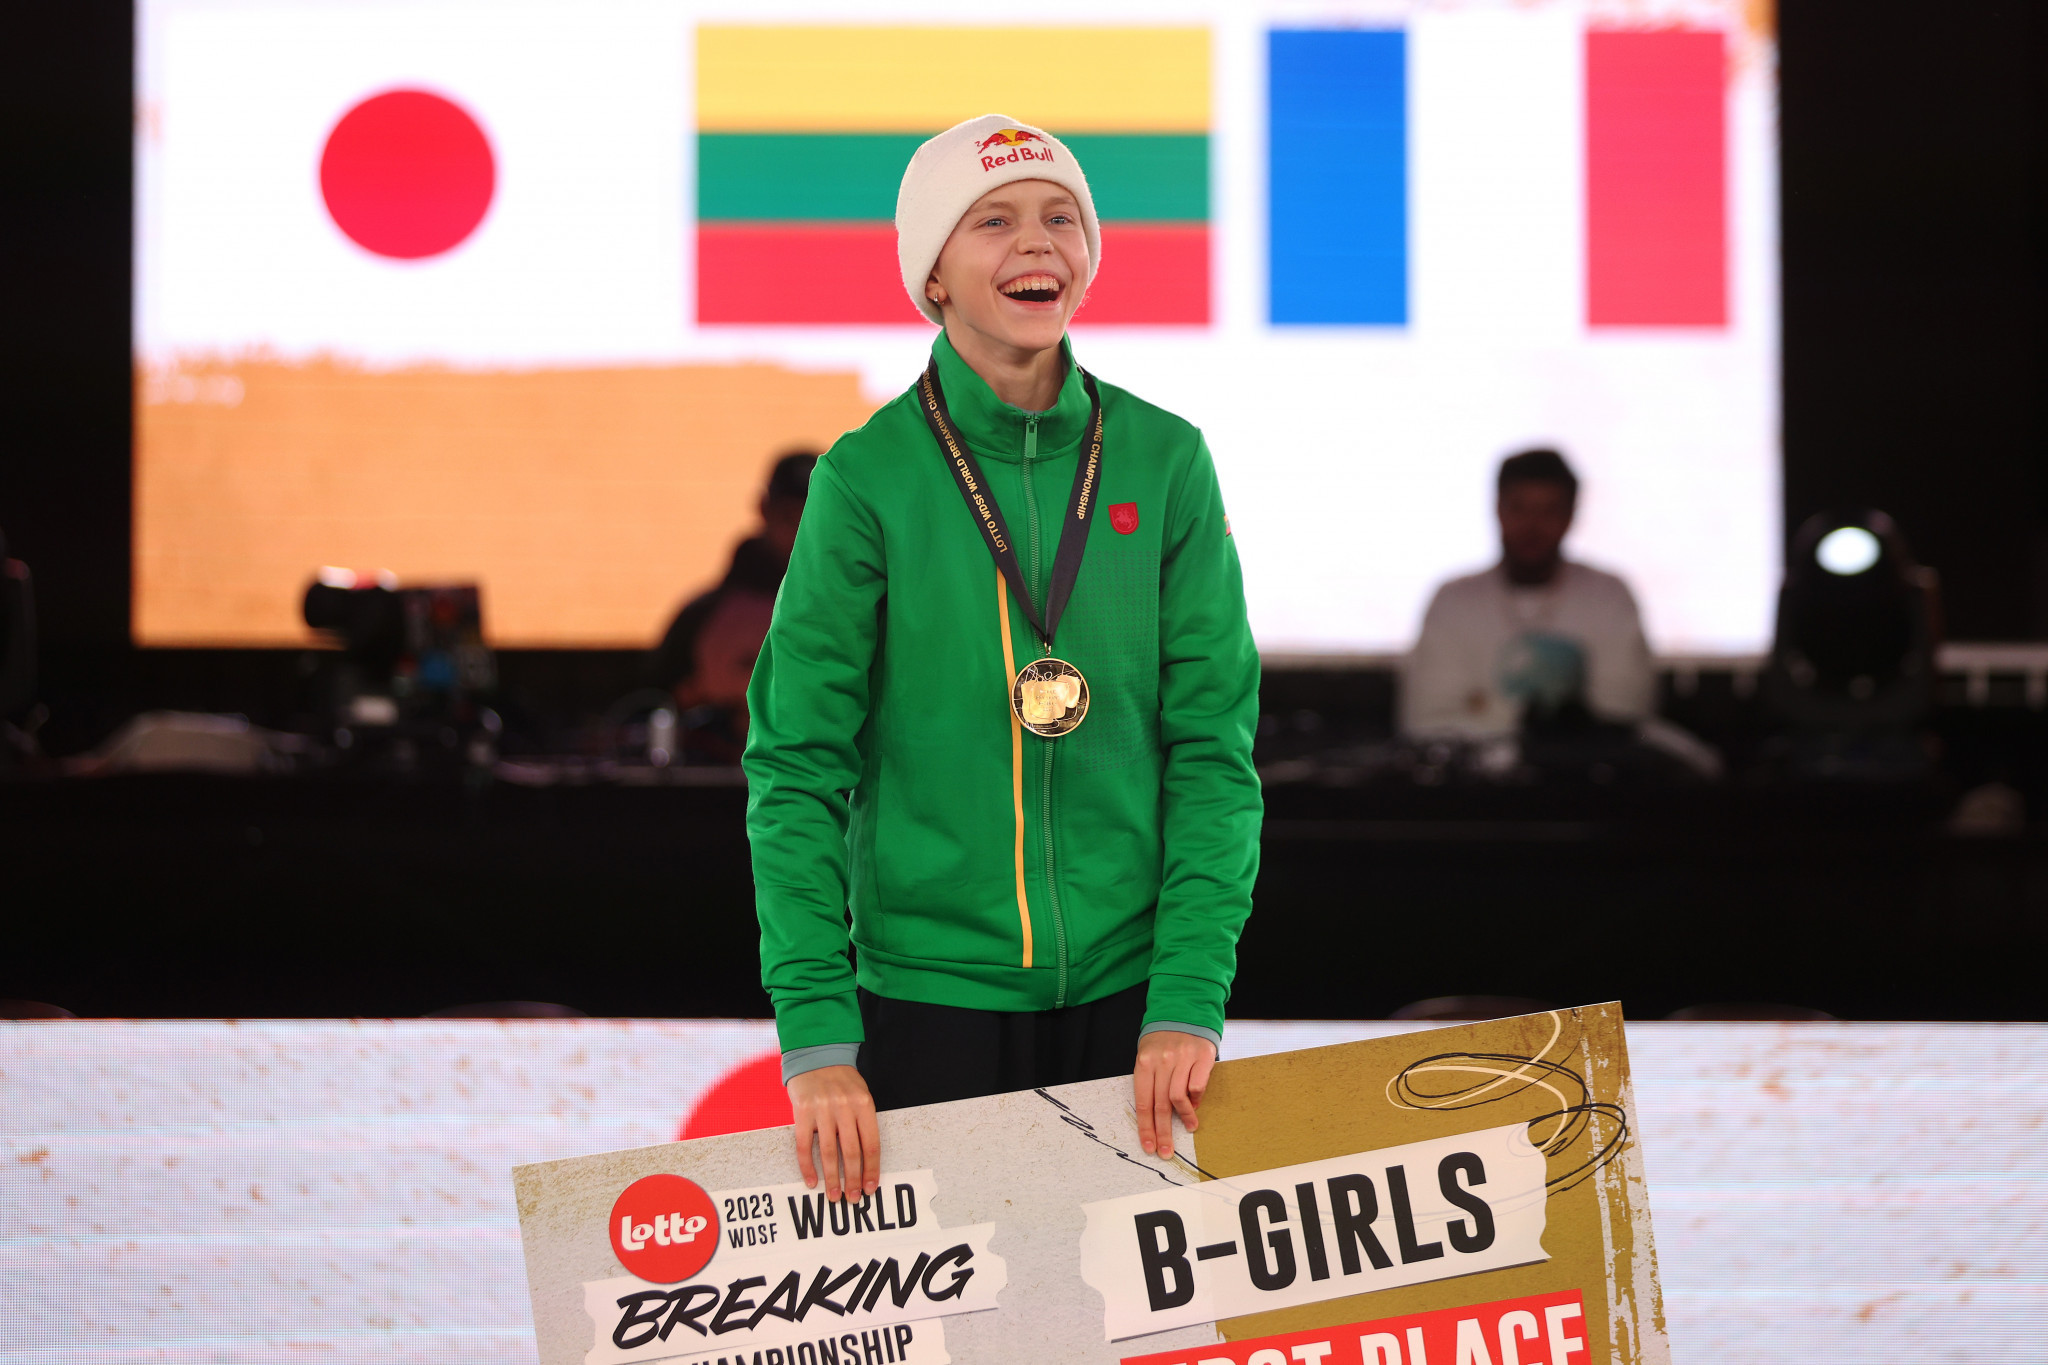 Lithuanian B-Girl Nicka, whose real name is Dominika Banevič, triumphed at the WDSF World Breaking Championships ©Getty Images